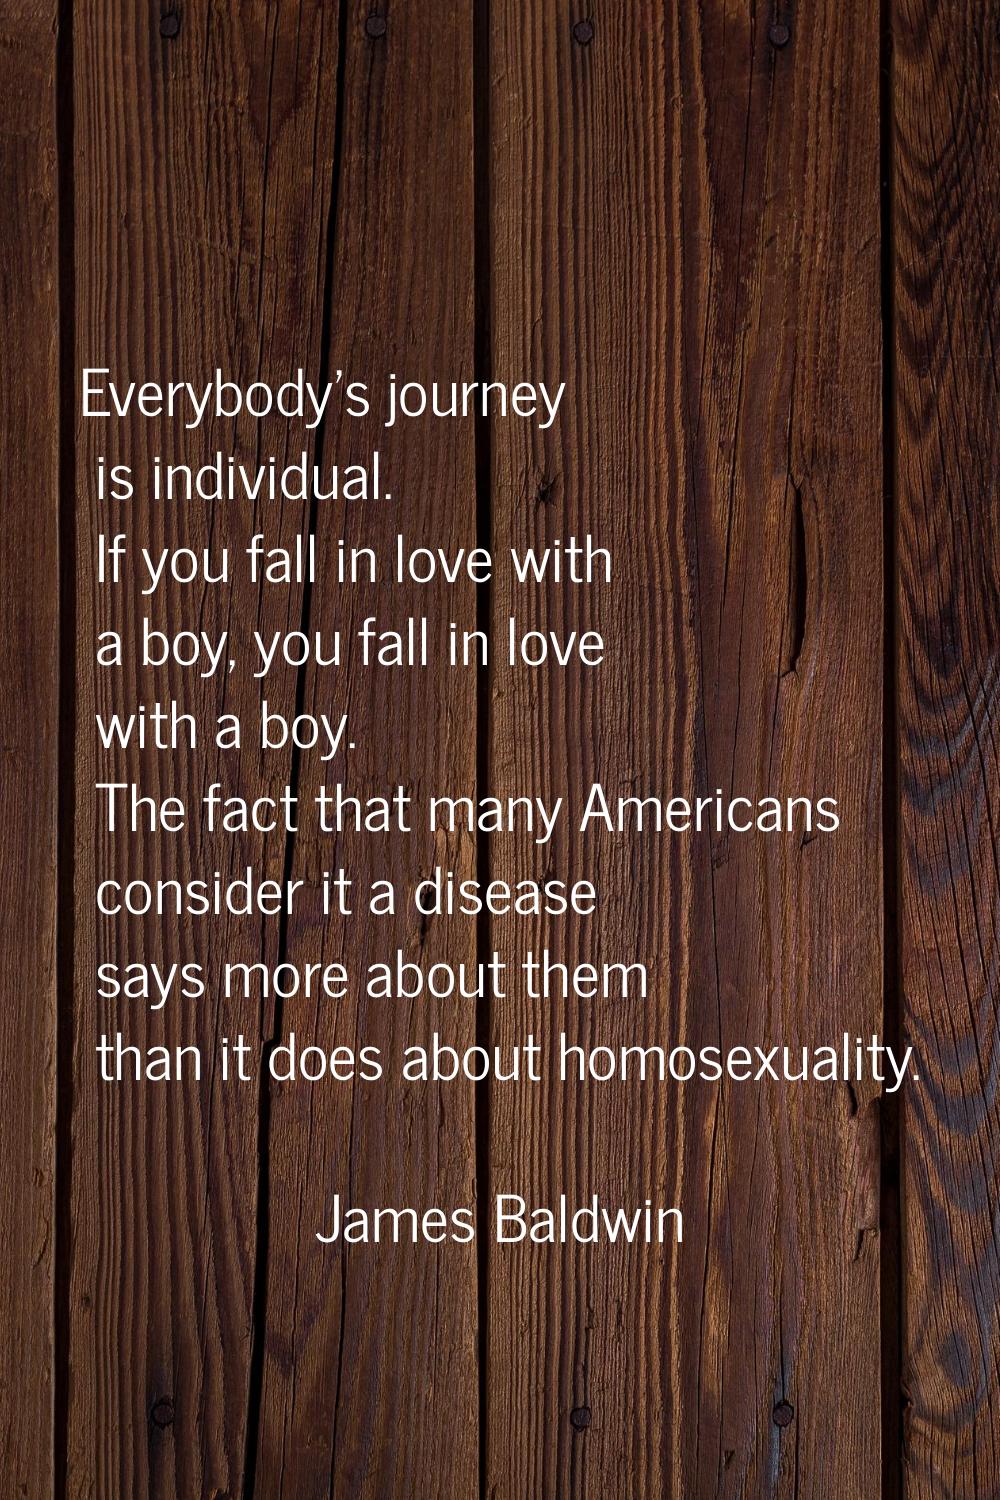 Everybody's journey is individual. If you fall in love with a boy, you fall in love with a boy. The